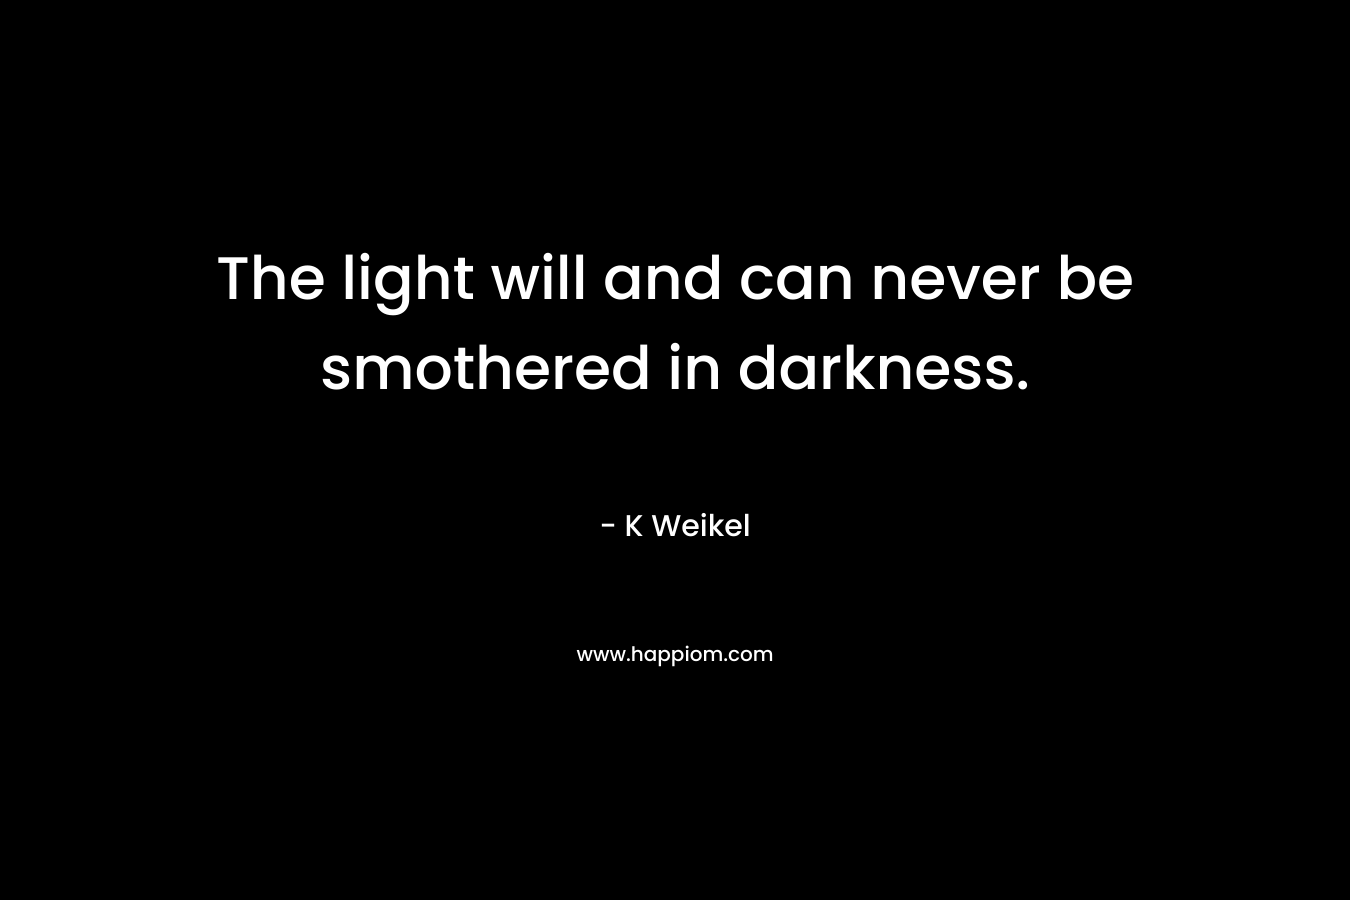 The light will and can never be smothered in darkness. – K Weikel